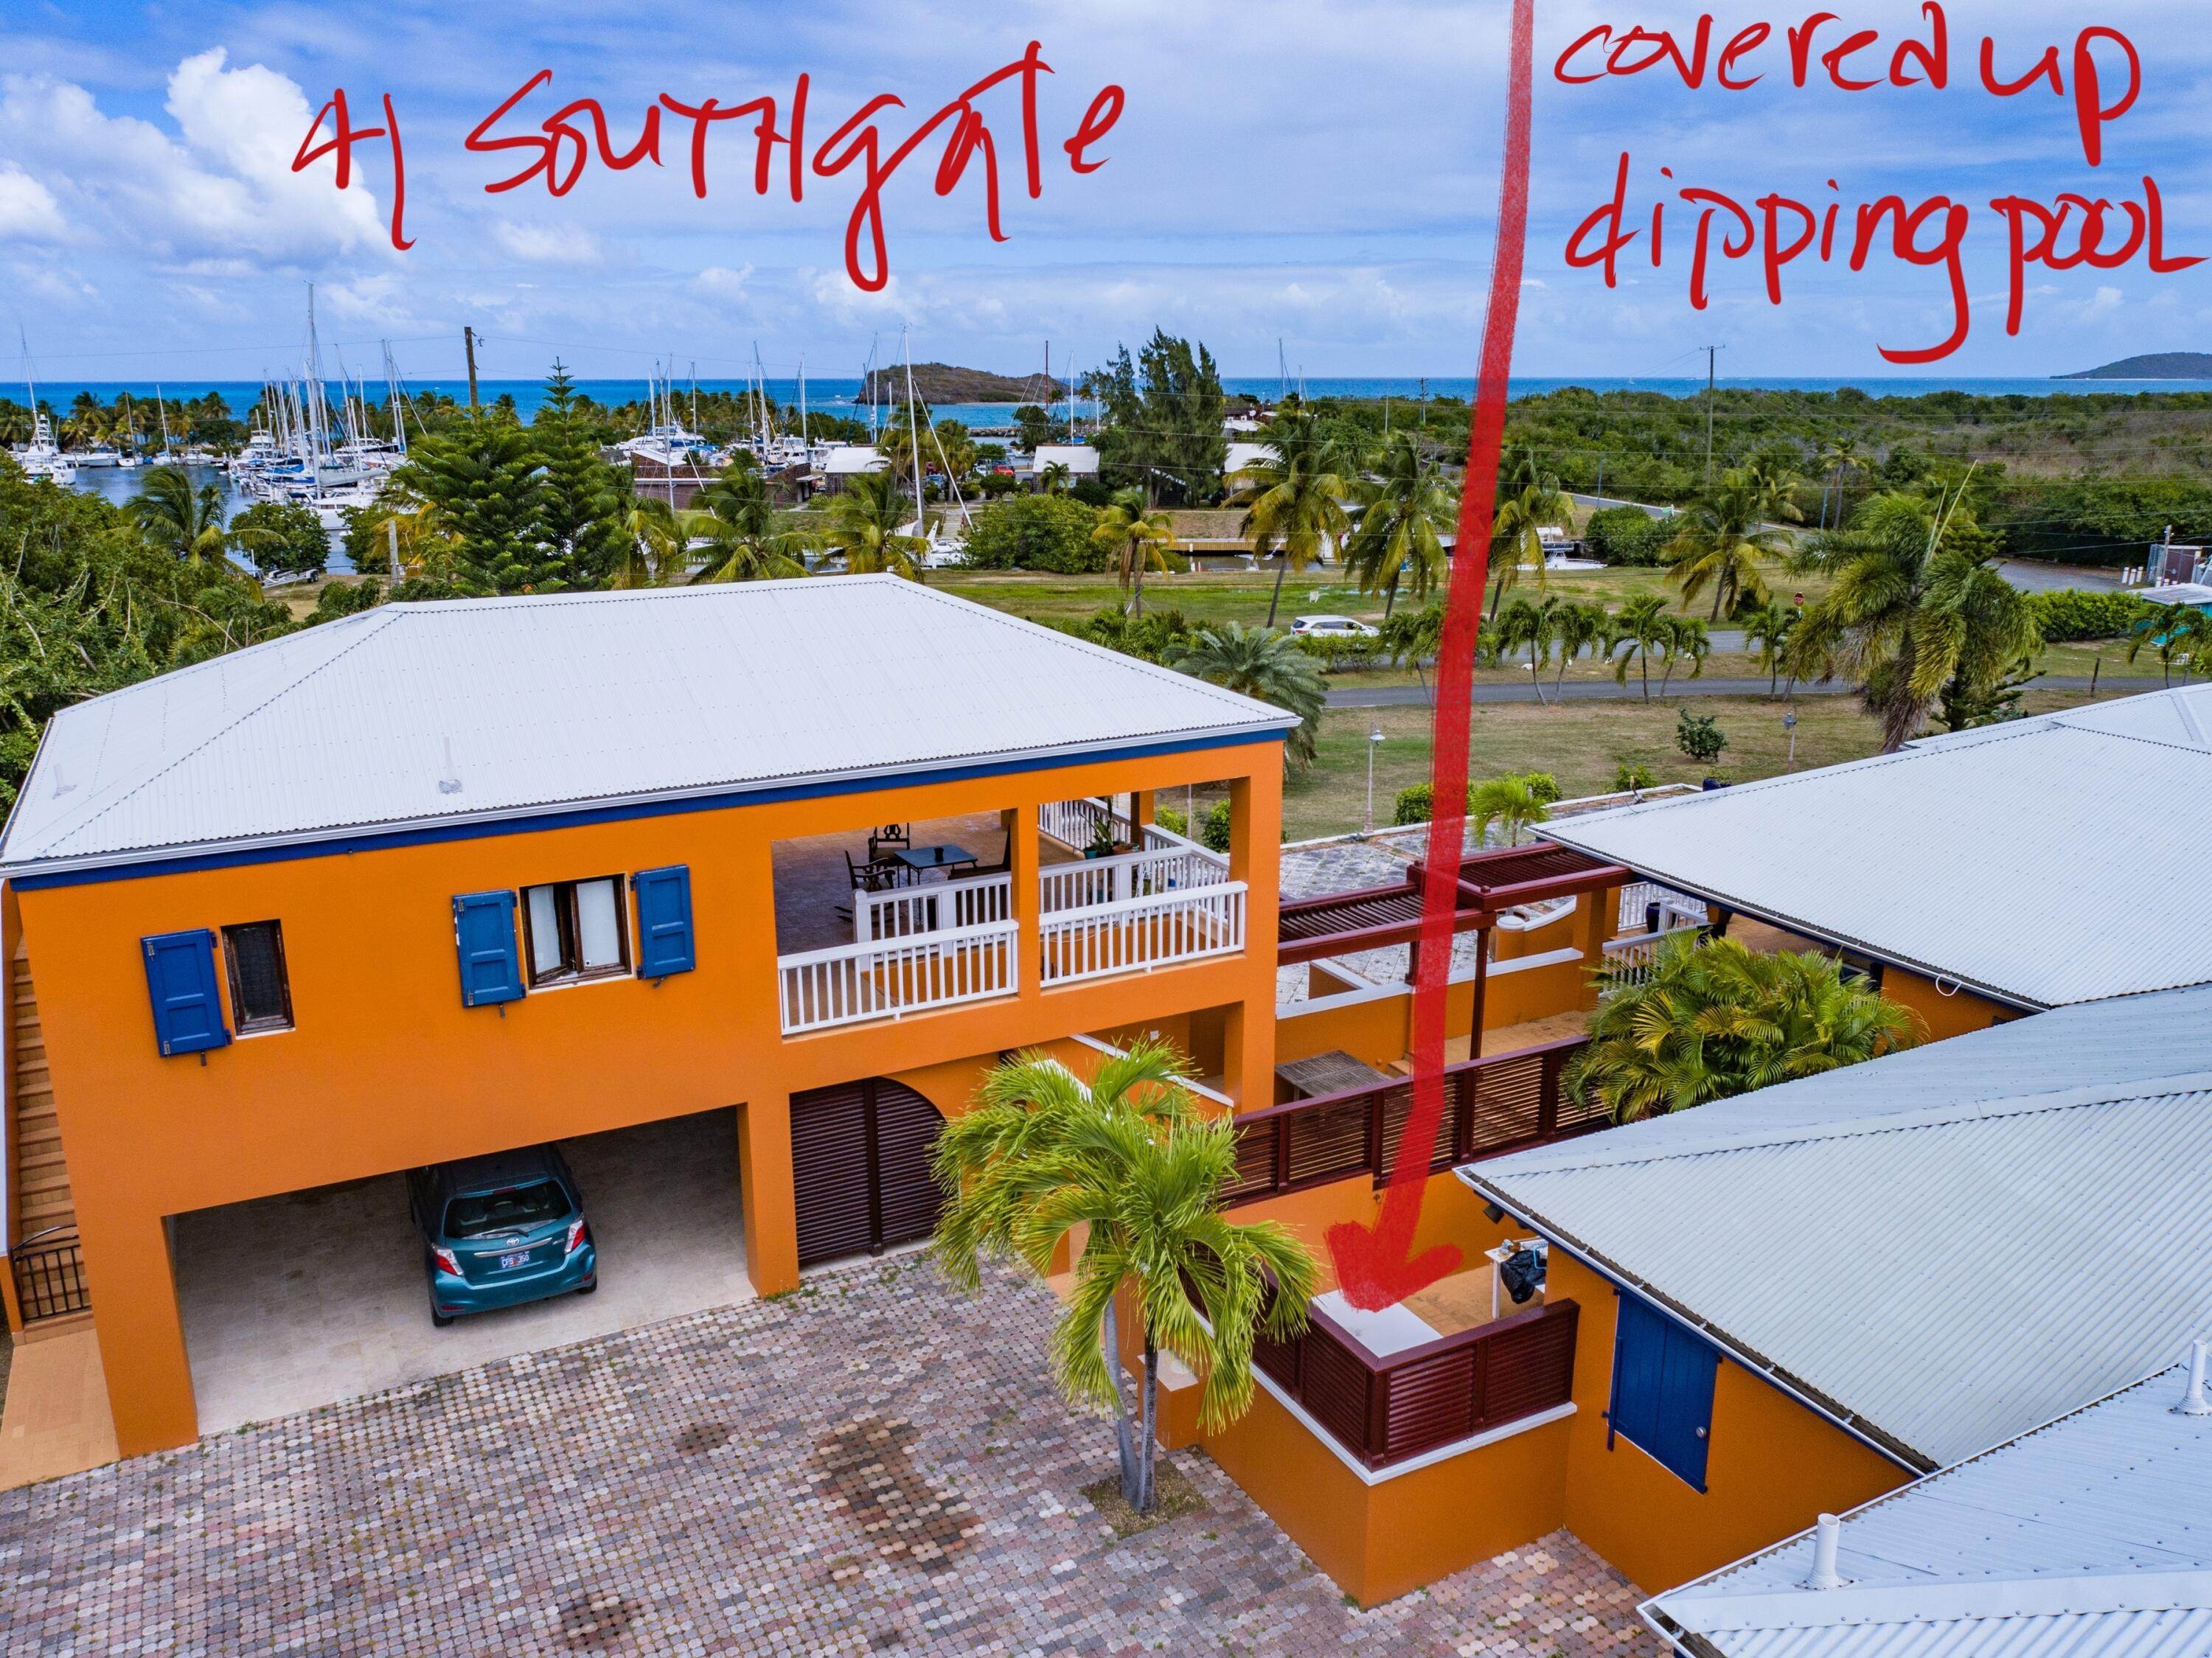 30. Single Family Homes for Sale at 41 Southgate Farm EA St Croix, Virgin Islands 00820 United States Virgin Islands